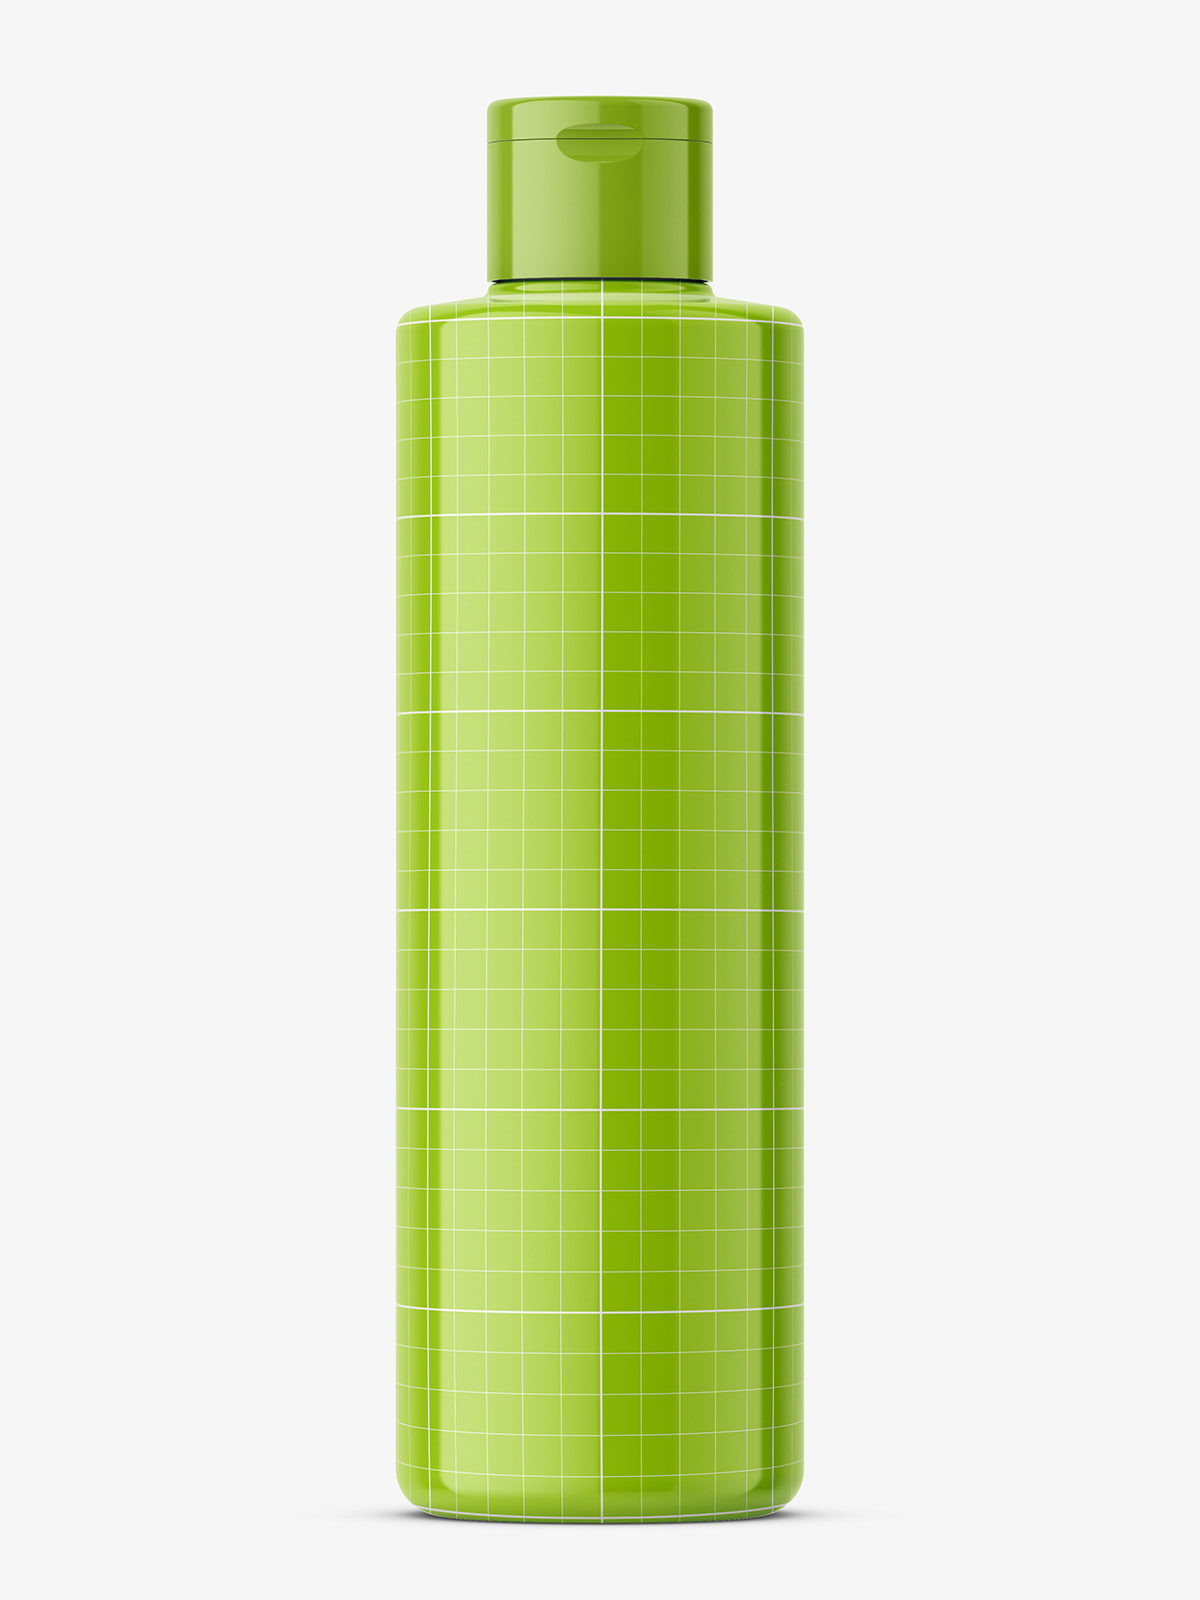 Download Simple round plastic bottle mockup / glossy - Smarty Mockups